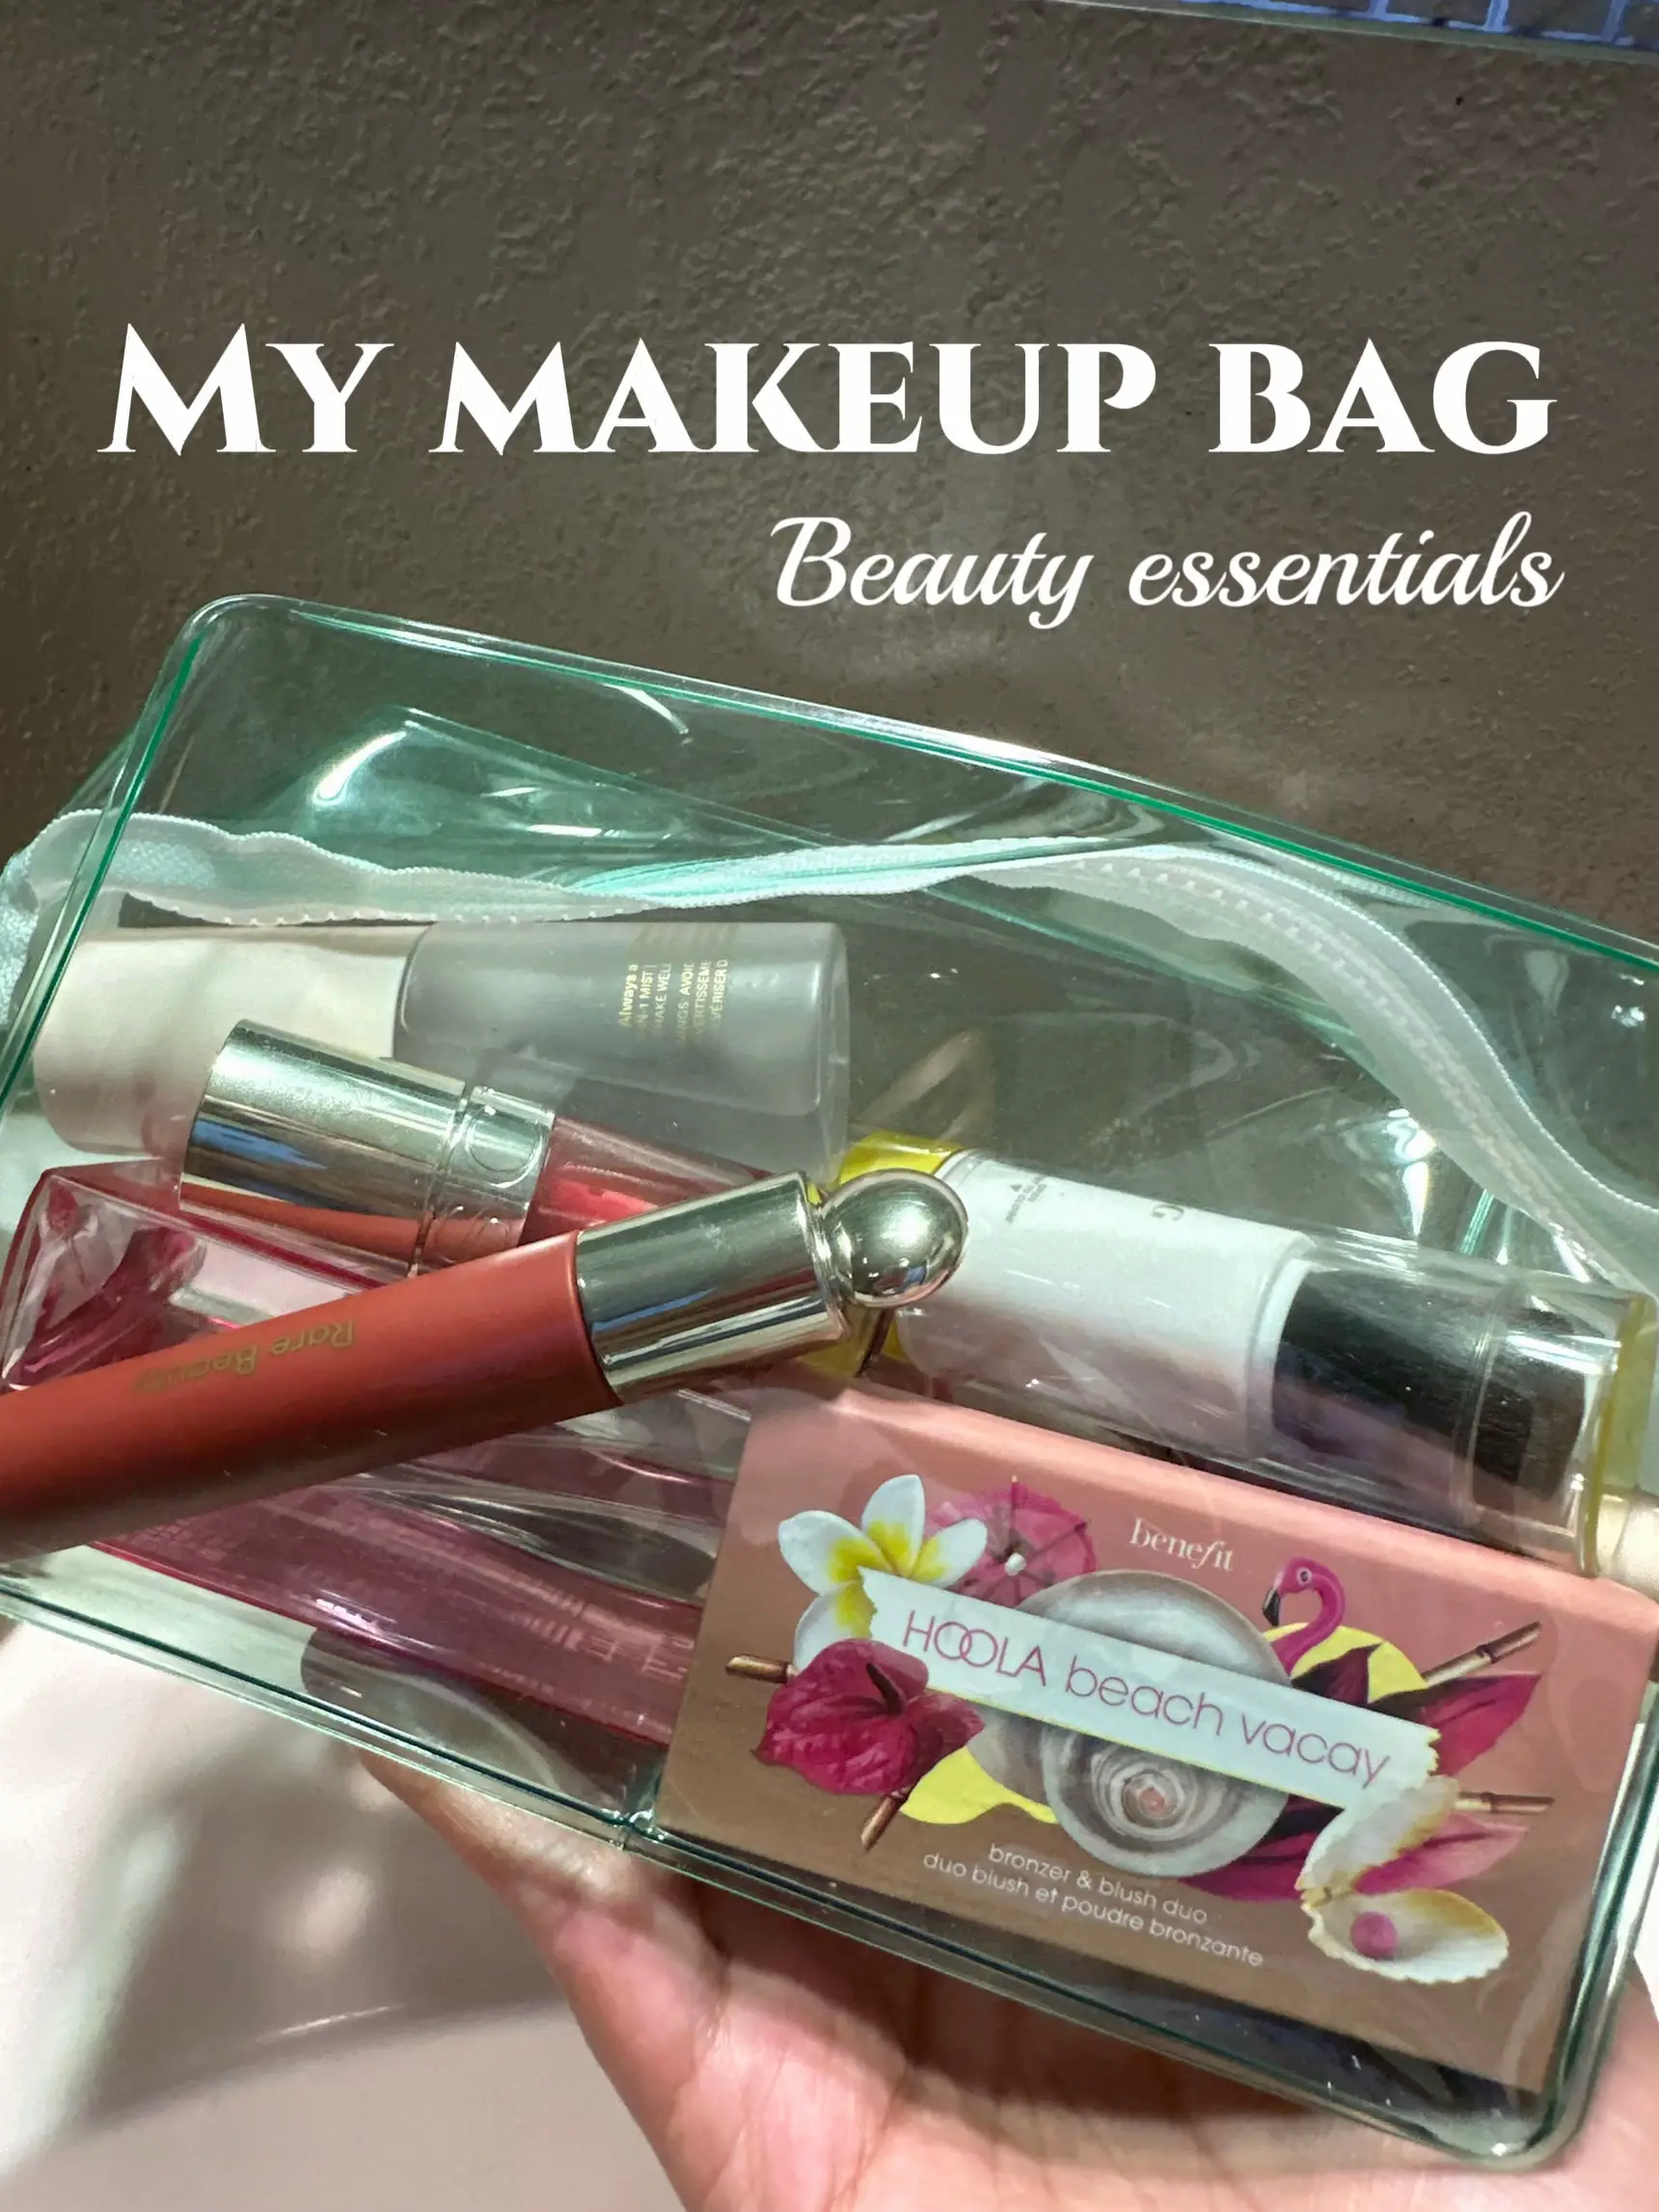 My Purse Collection - The Beauty Look Book